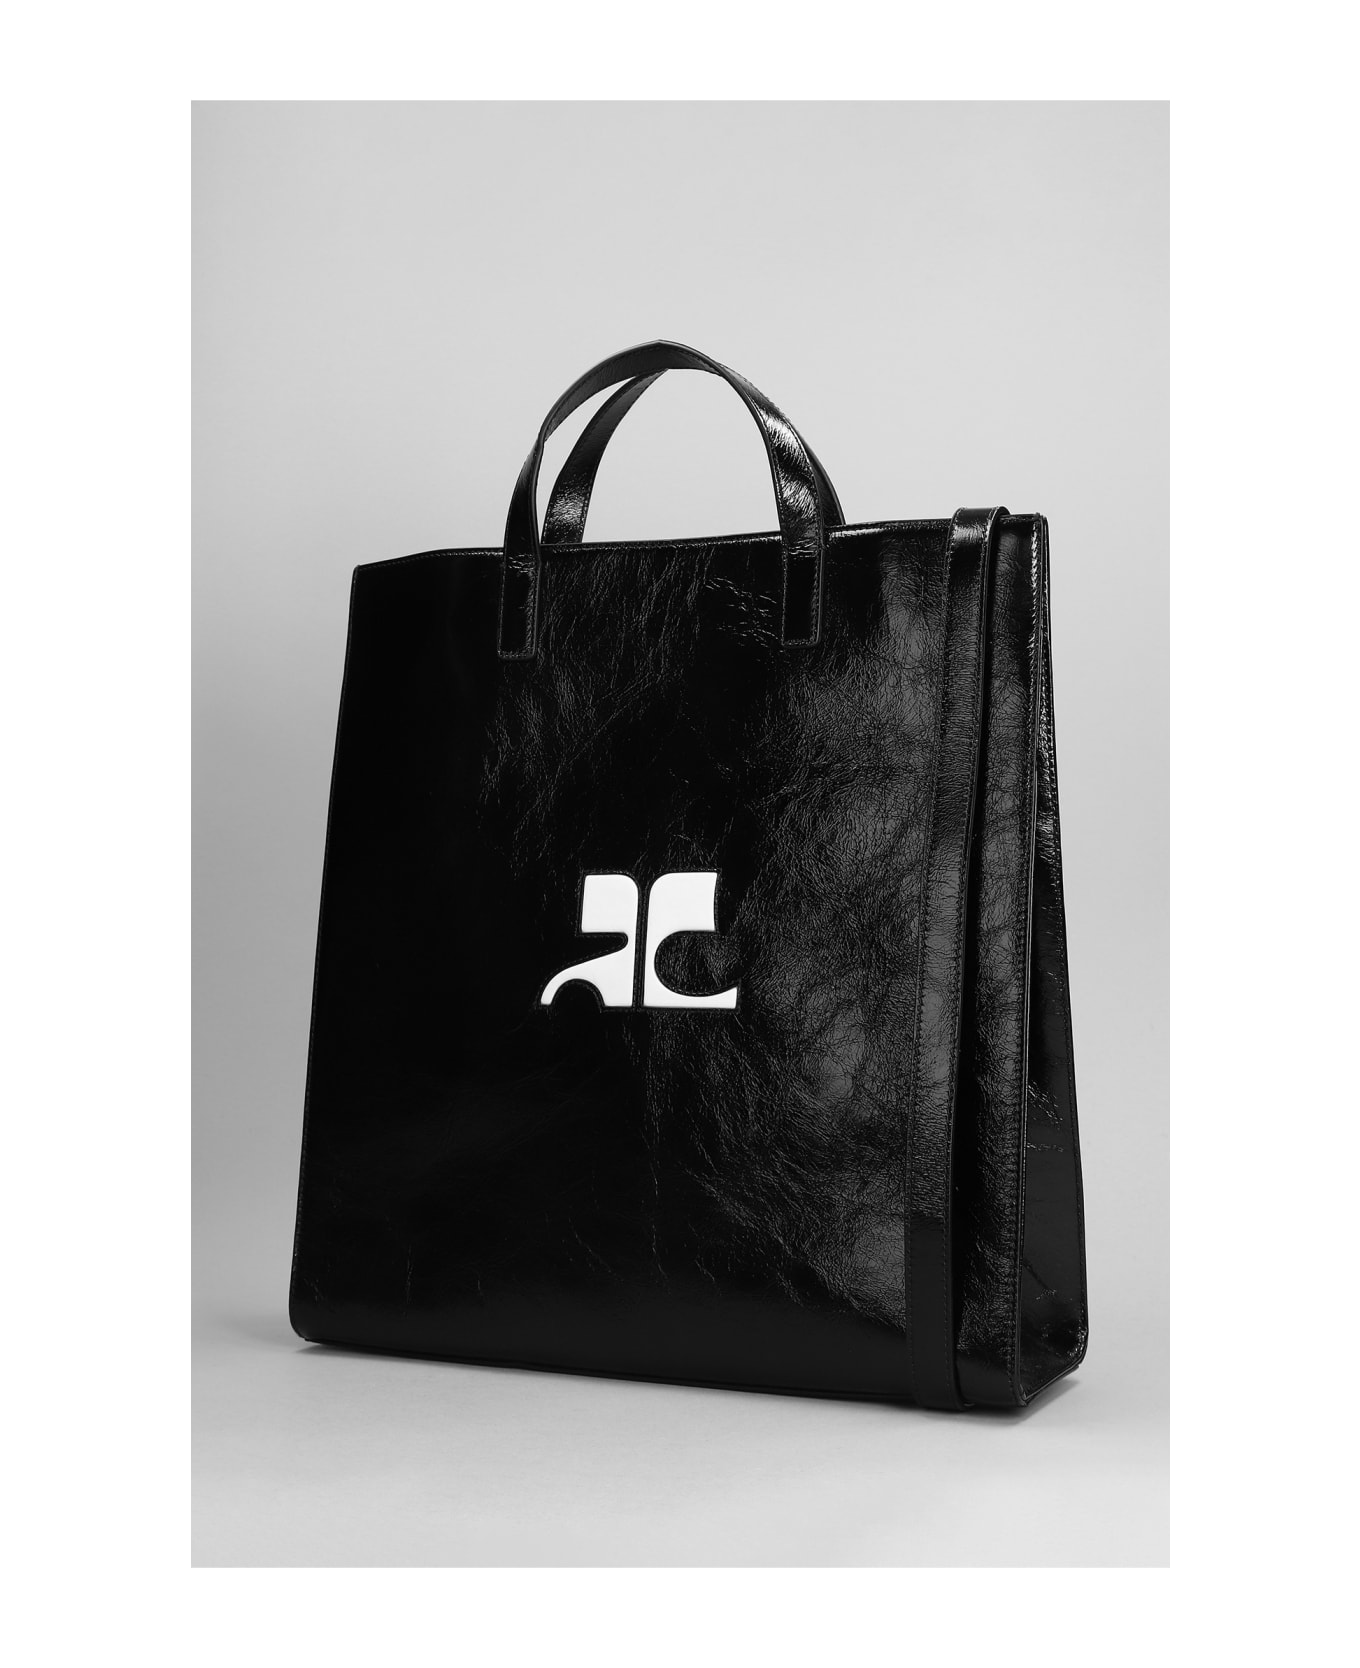 Courrèges Tote In Black Patent Leather - black